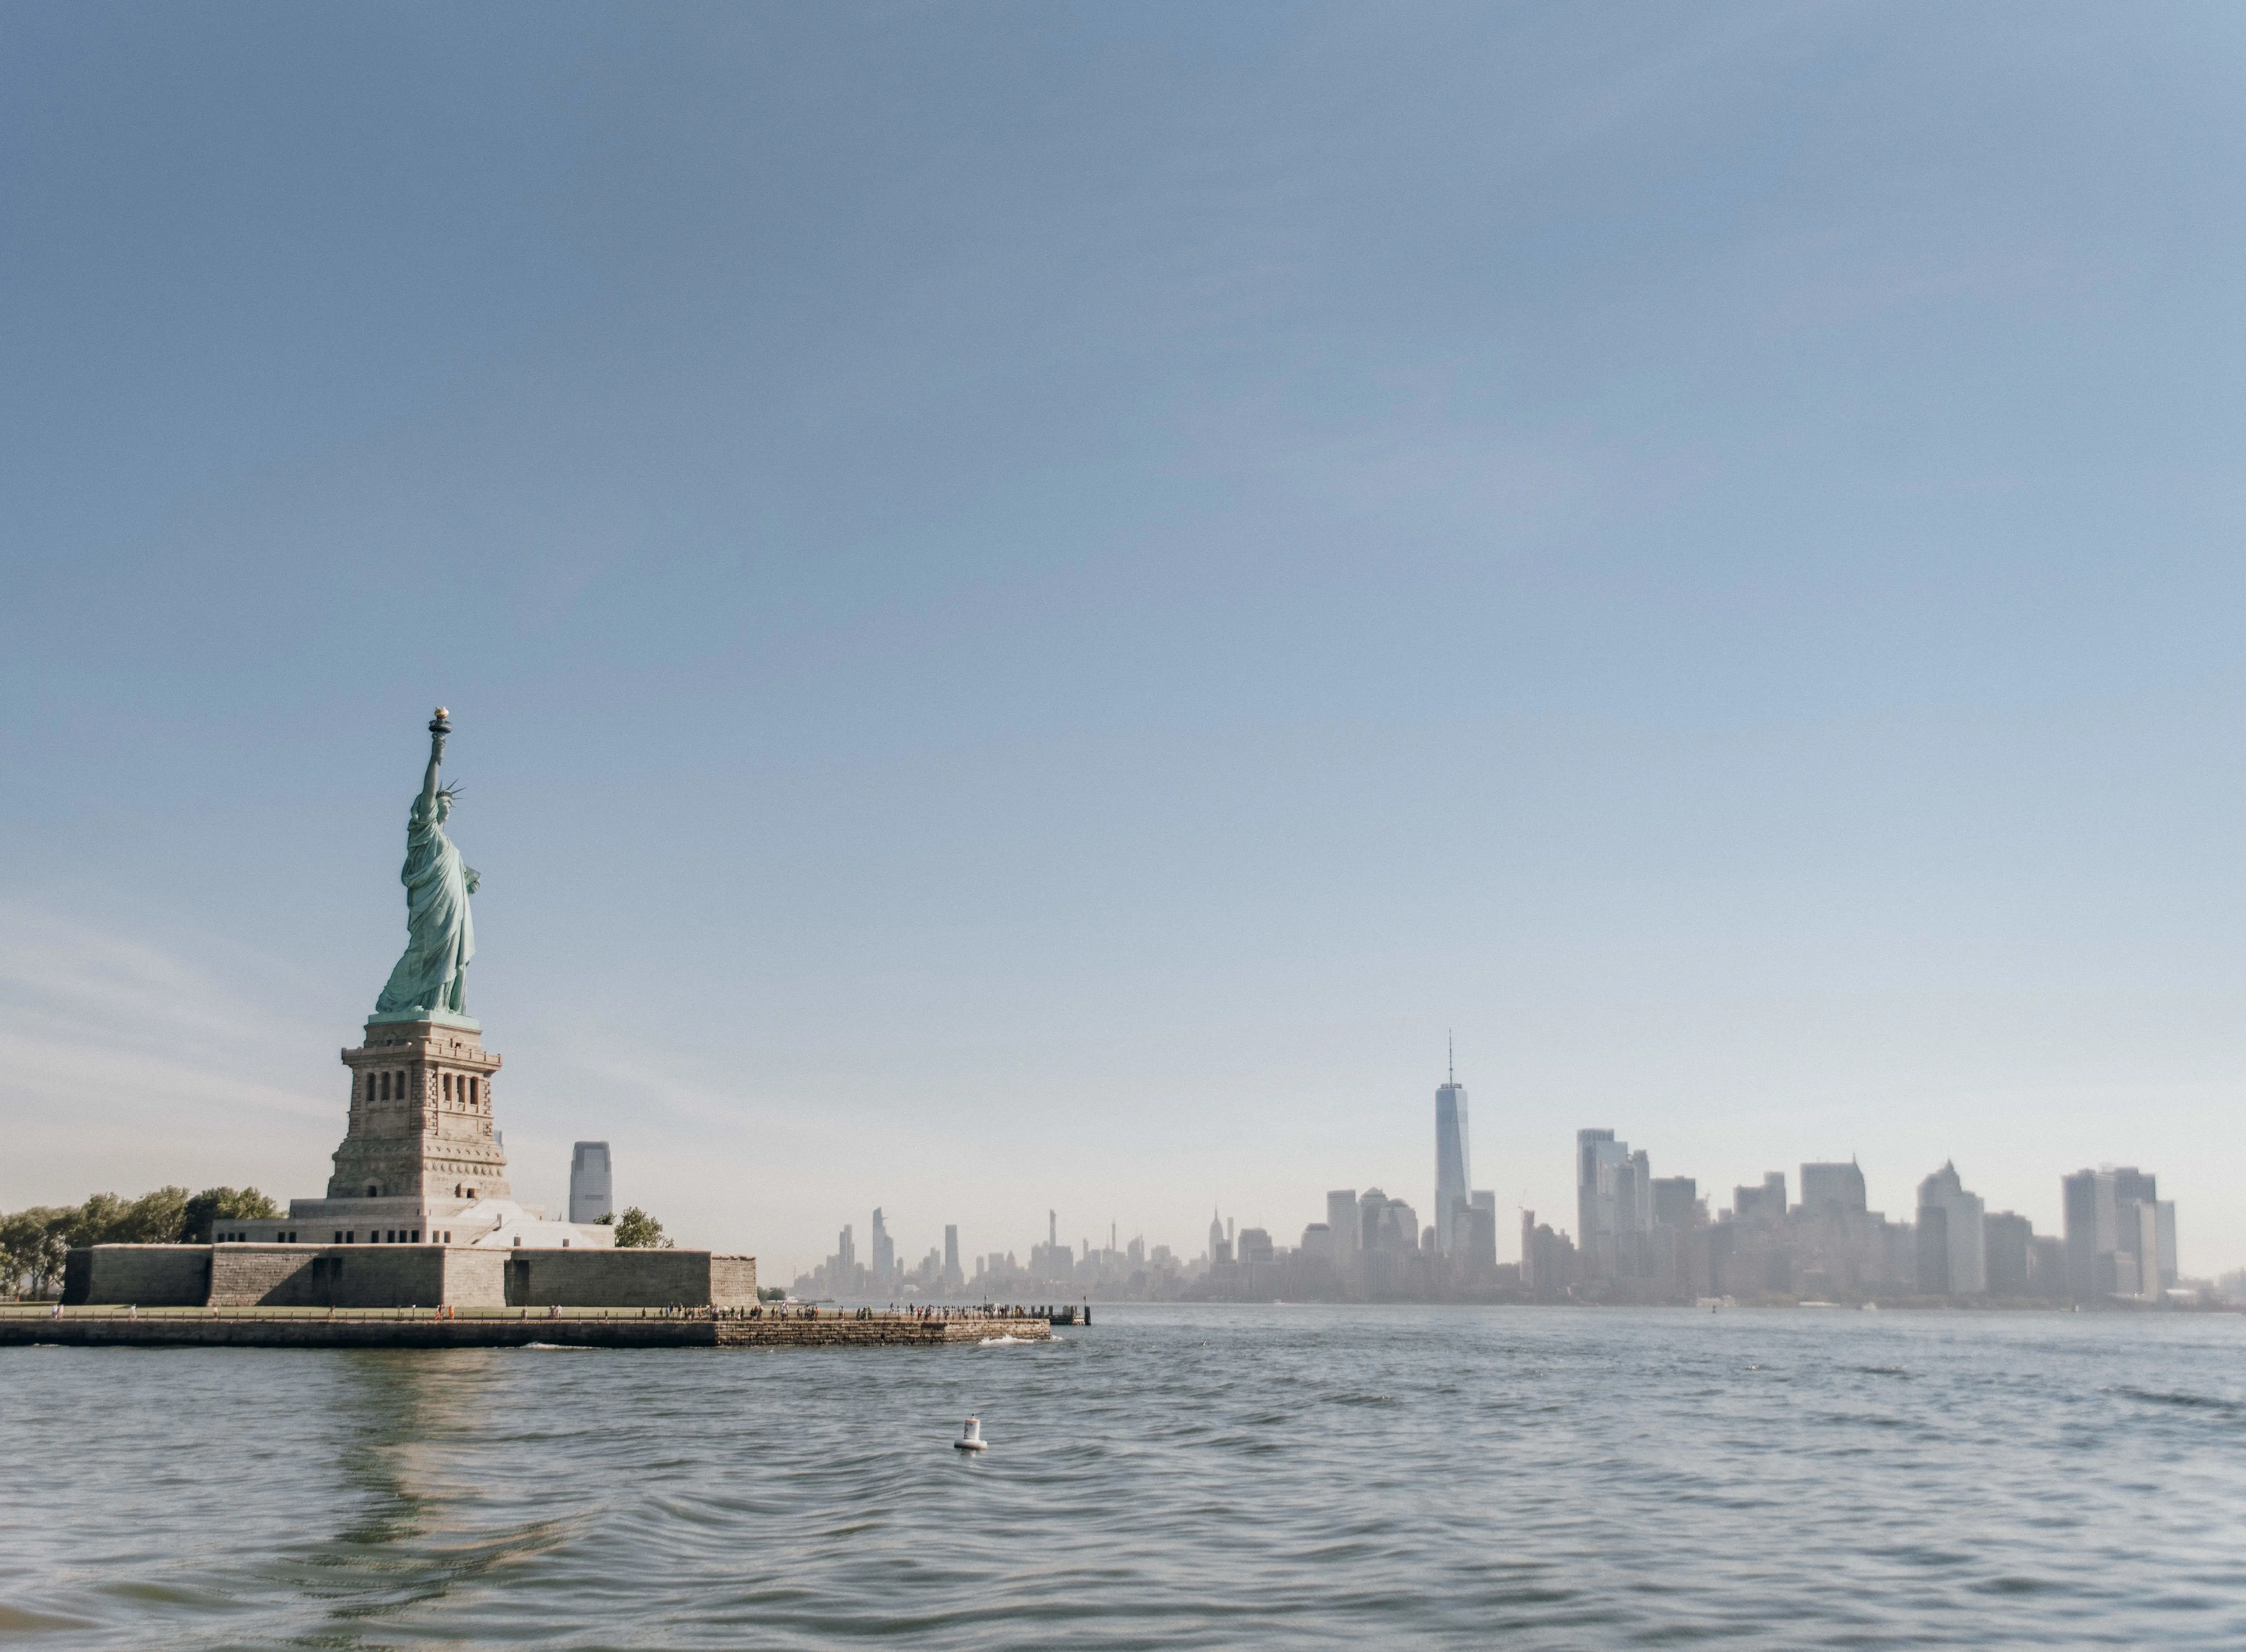 14 insider tips for visiting the Statue of Liberty by a New Yorker